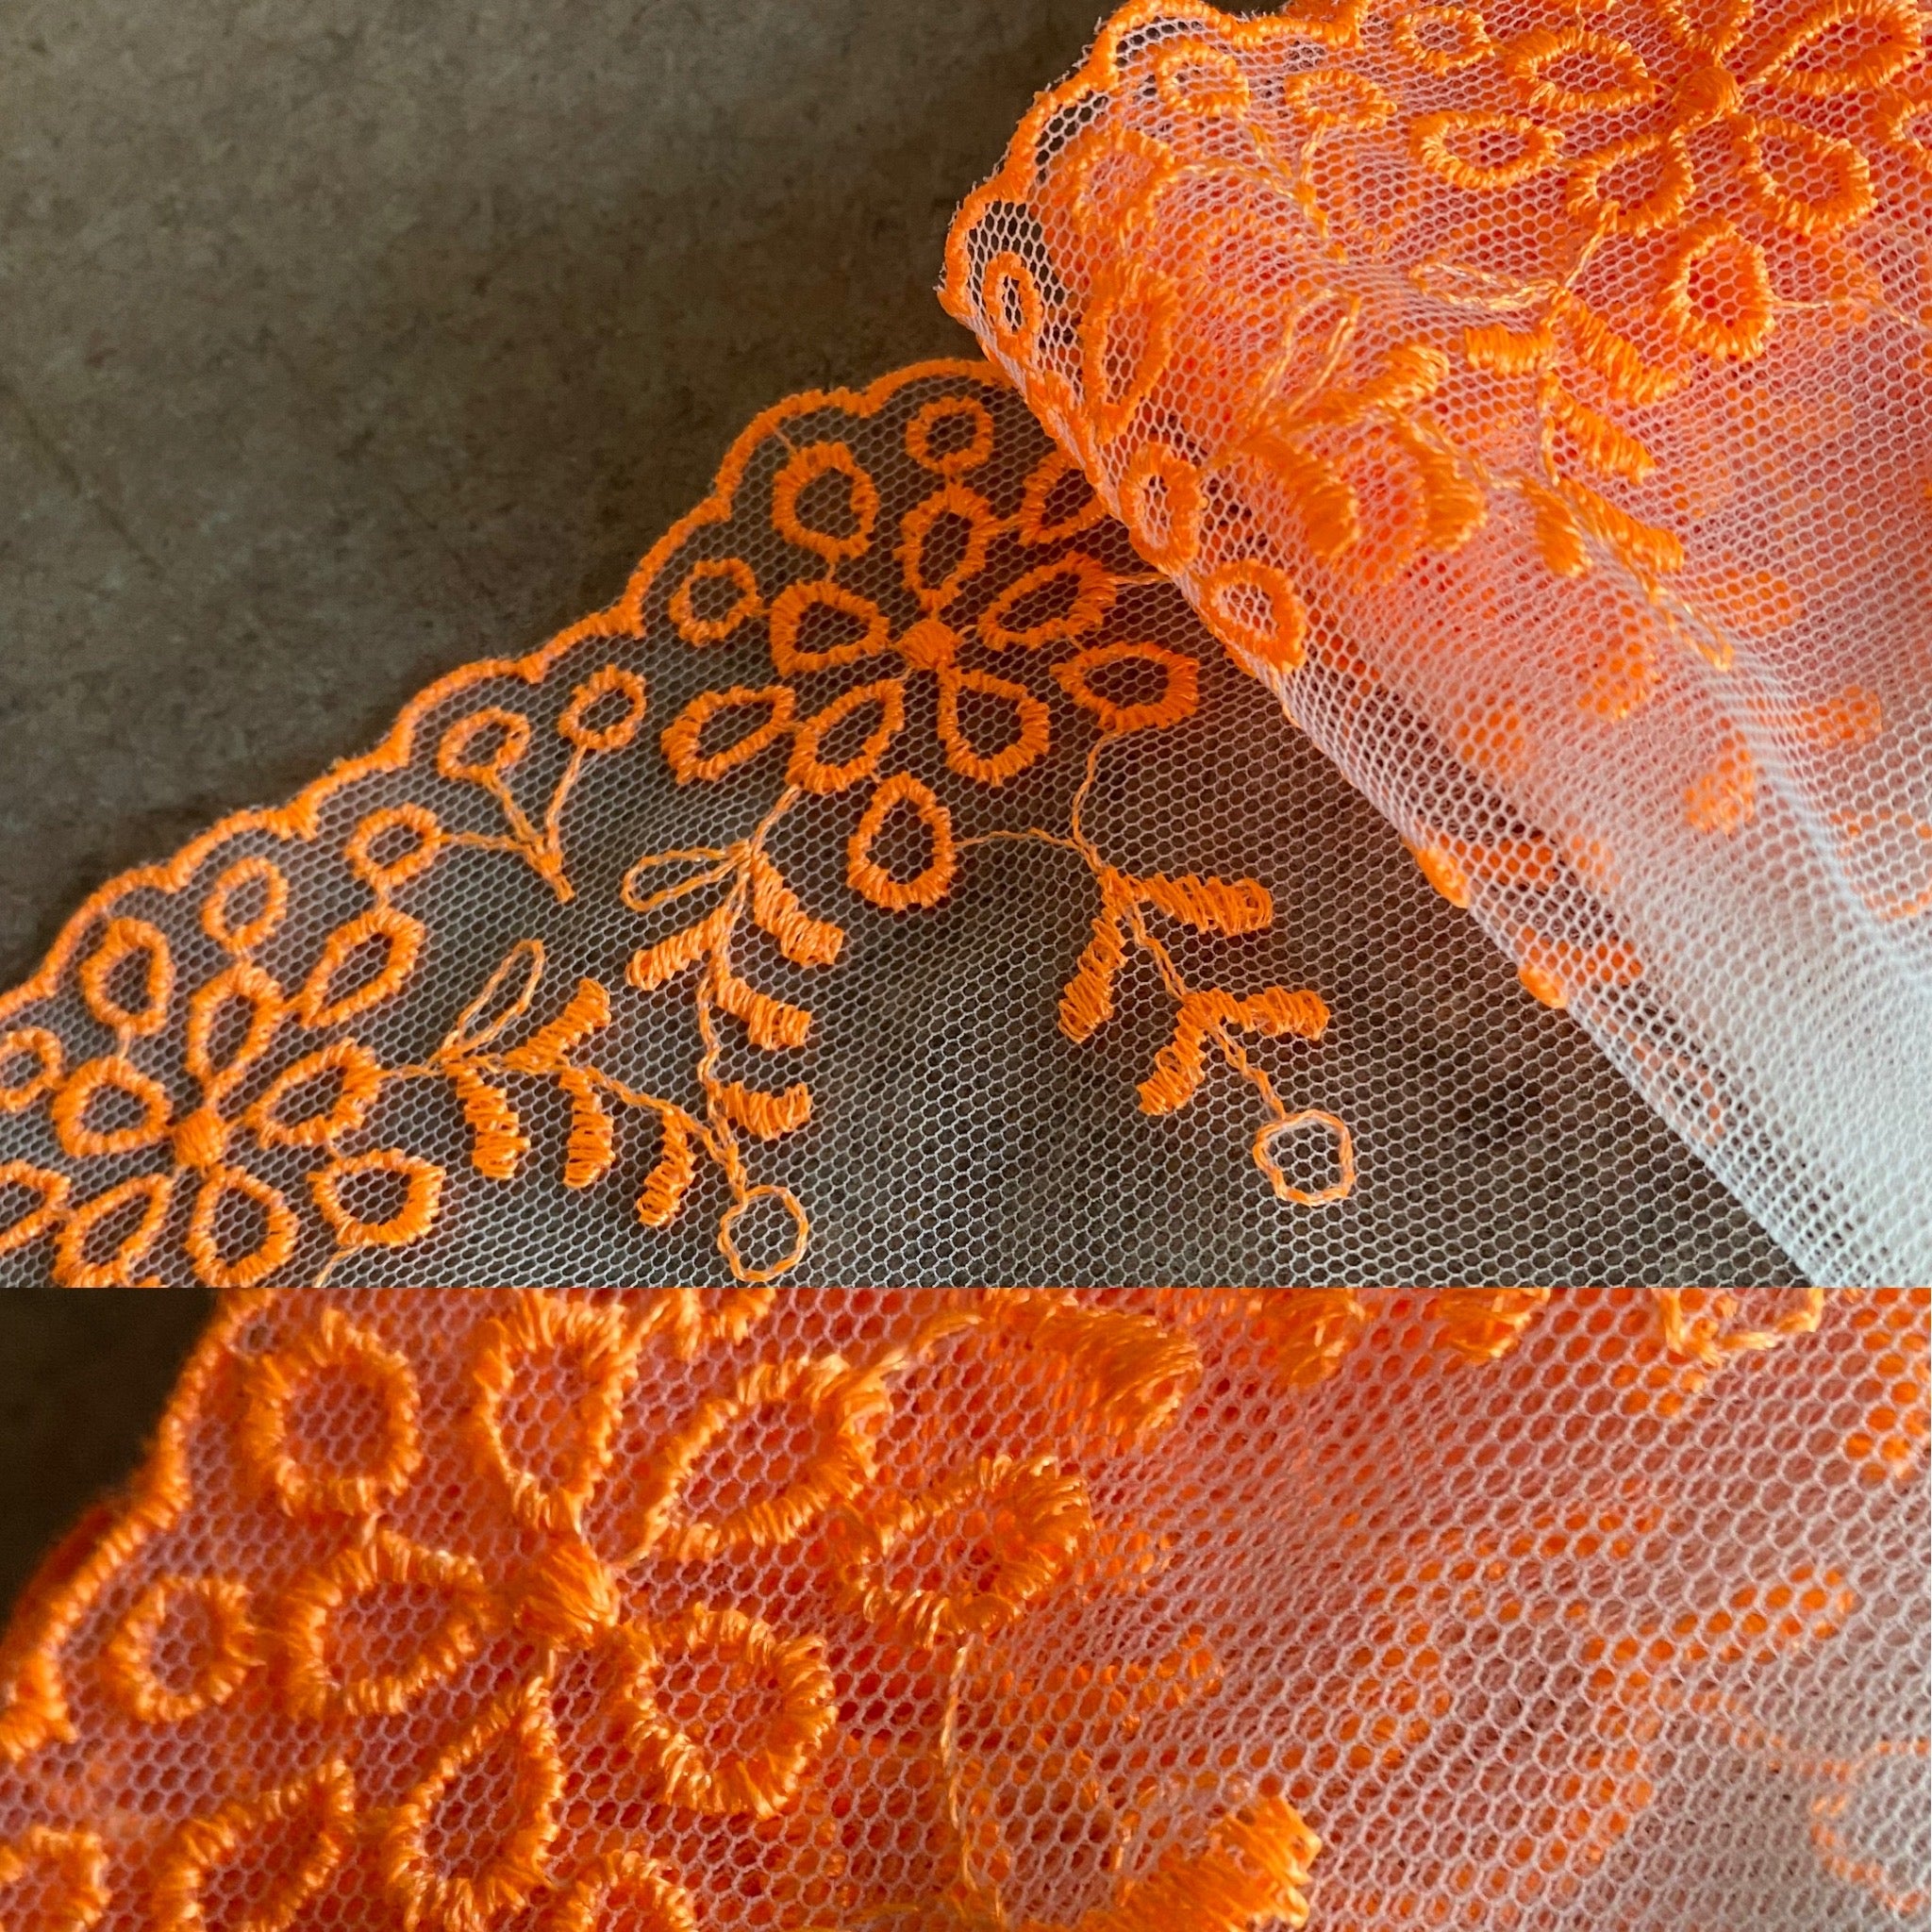 Fluorescent Orange Floral Embroidery Edging “Lace” (17cm Wide) - 1m